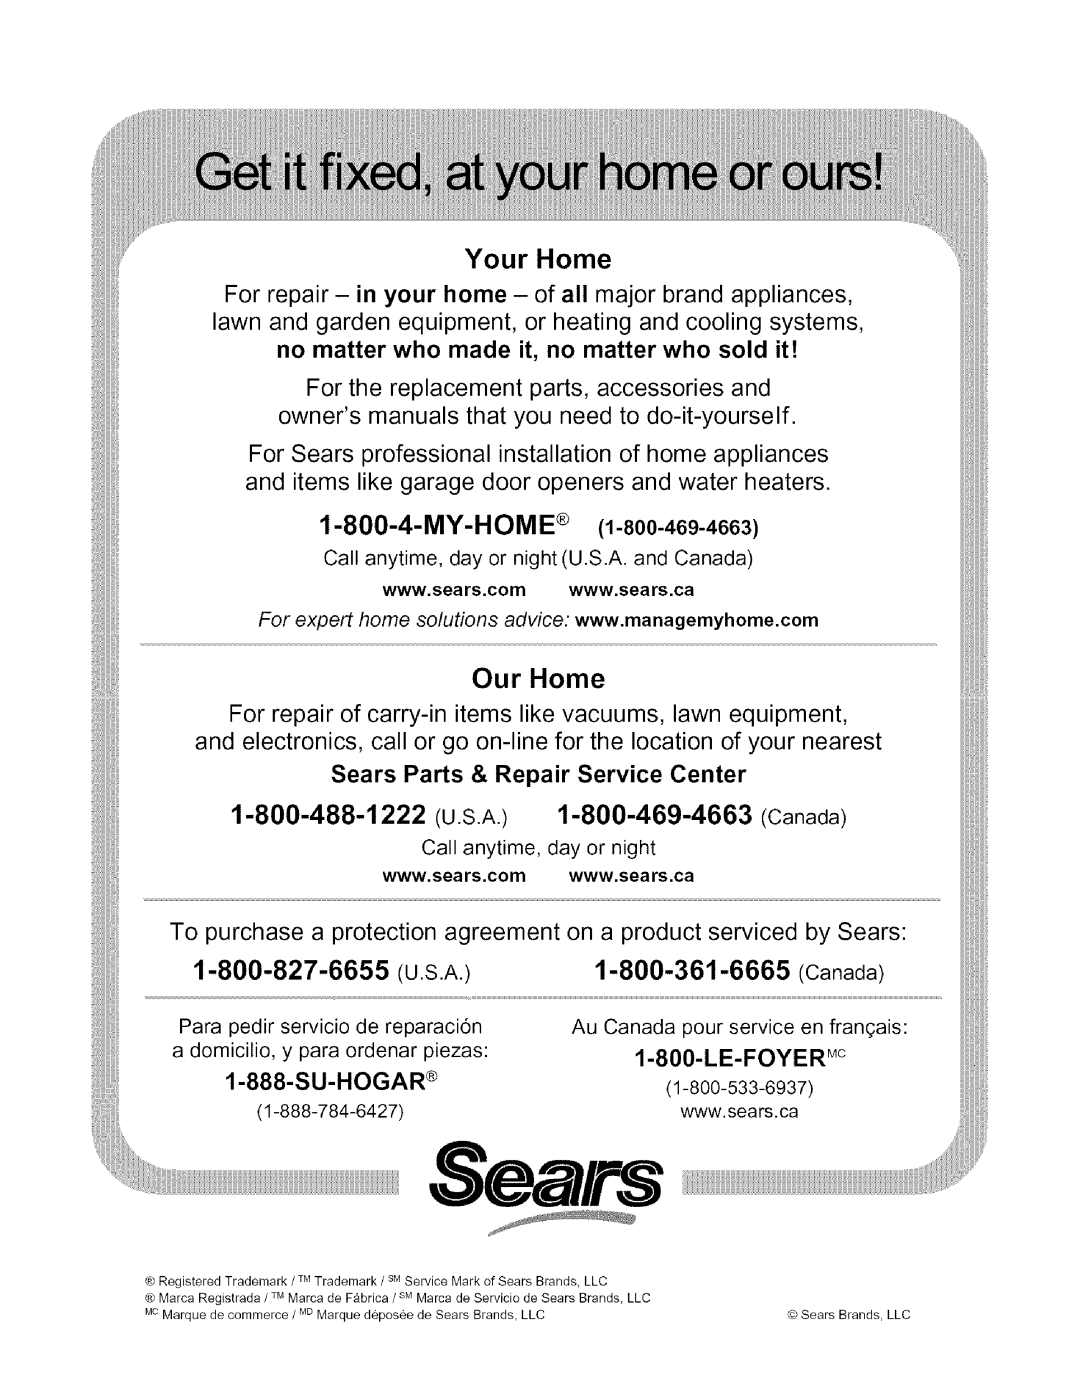 Kenmore 790.4672 Your Home, My-Home, 1-800-488-1222 U.S.A. 1-800-469-4663 Canada, Sears Parts & Repair Service Center 